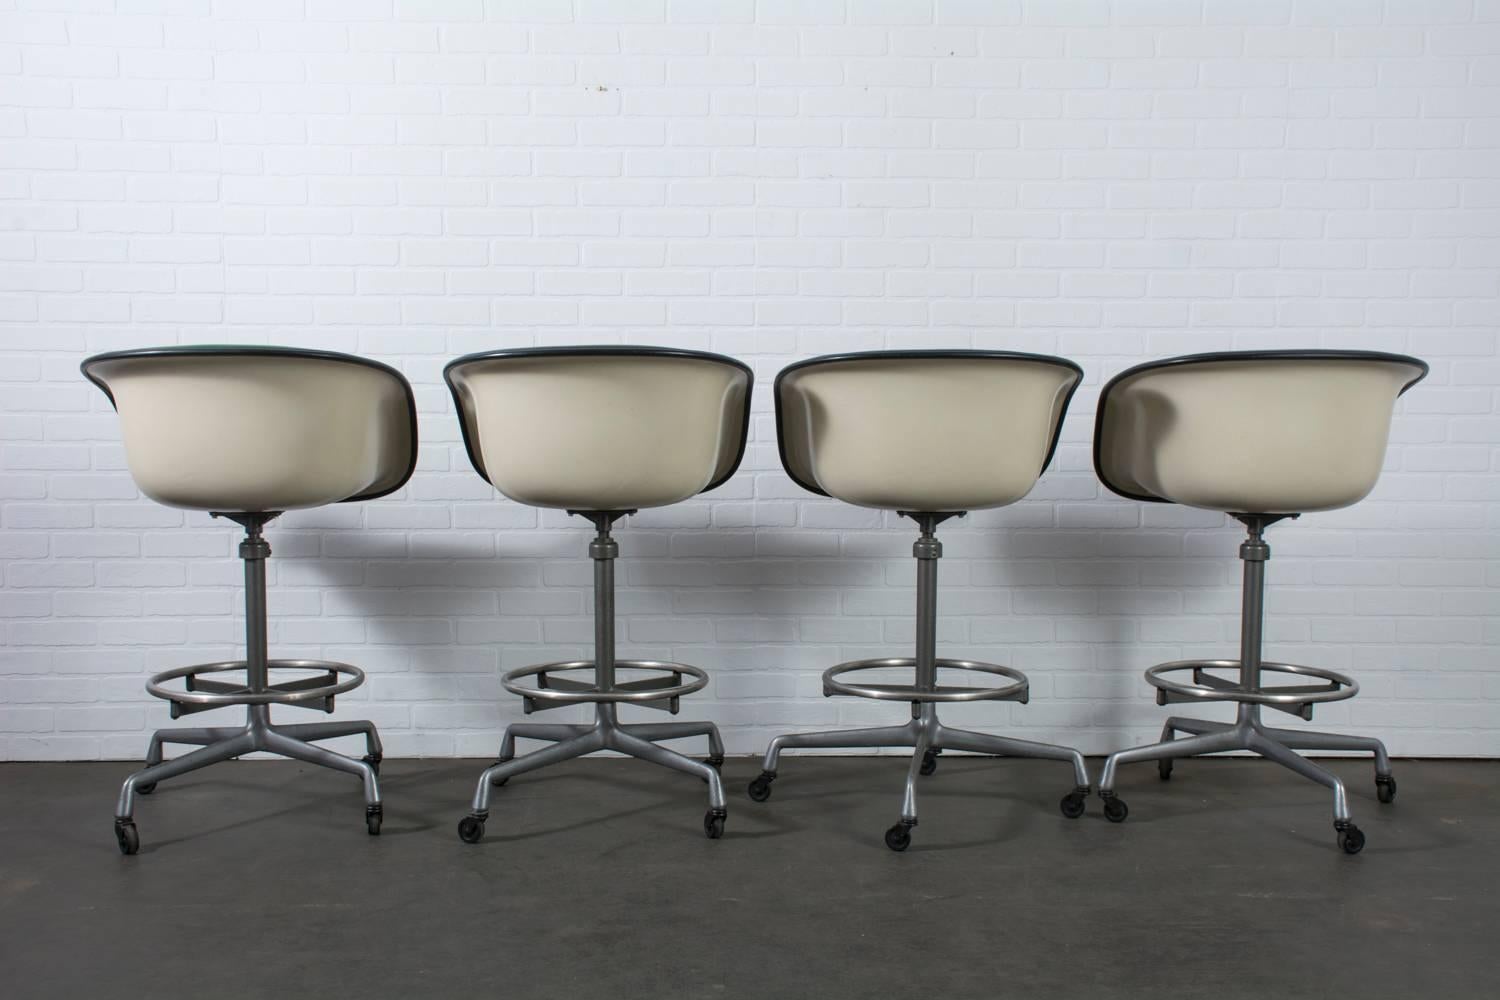 This set of four Mid-Century Modern stools was designed by Charles and Ray Eames. They feature Herman Miller cast aluminum and enameled steel secretarial stool bases that rest on four rubber casters (model EC123-36) and La Fonda armchair seats with